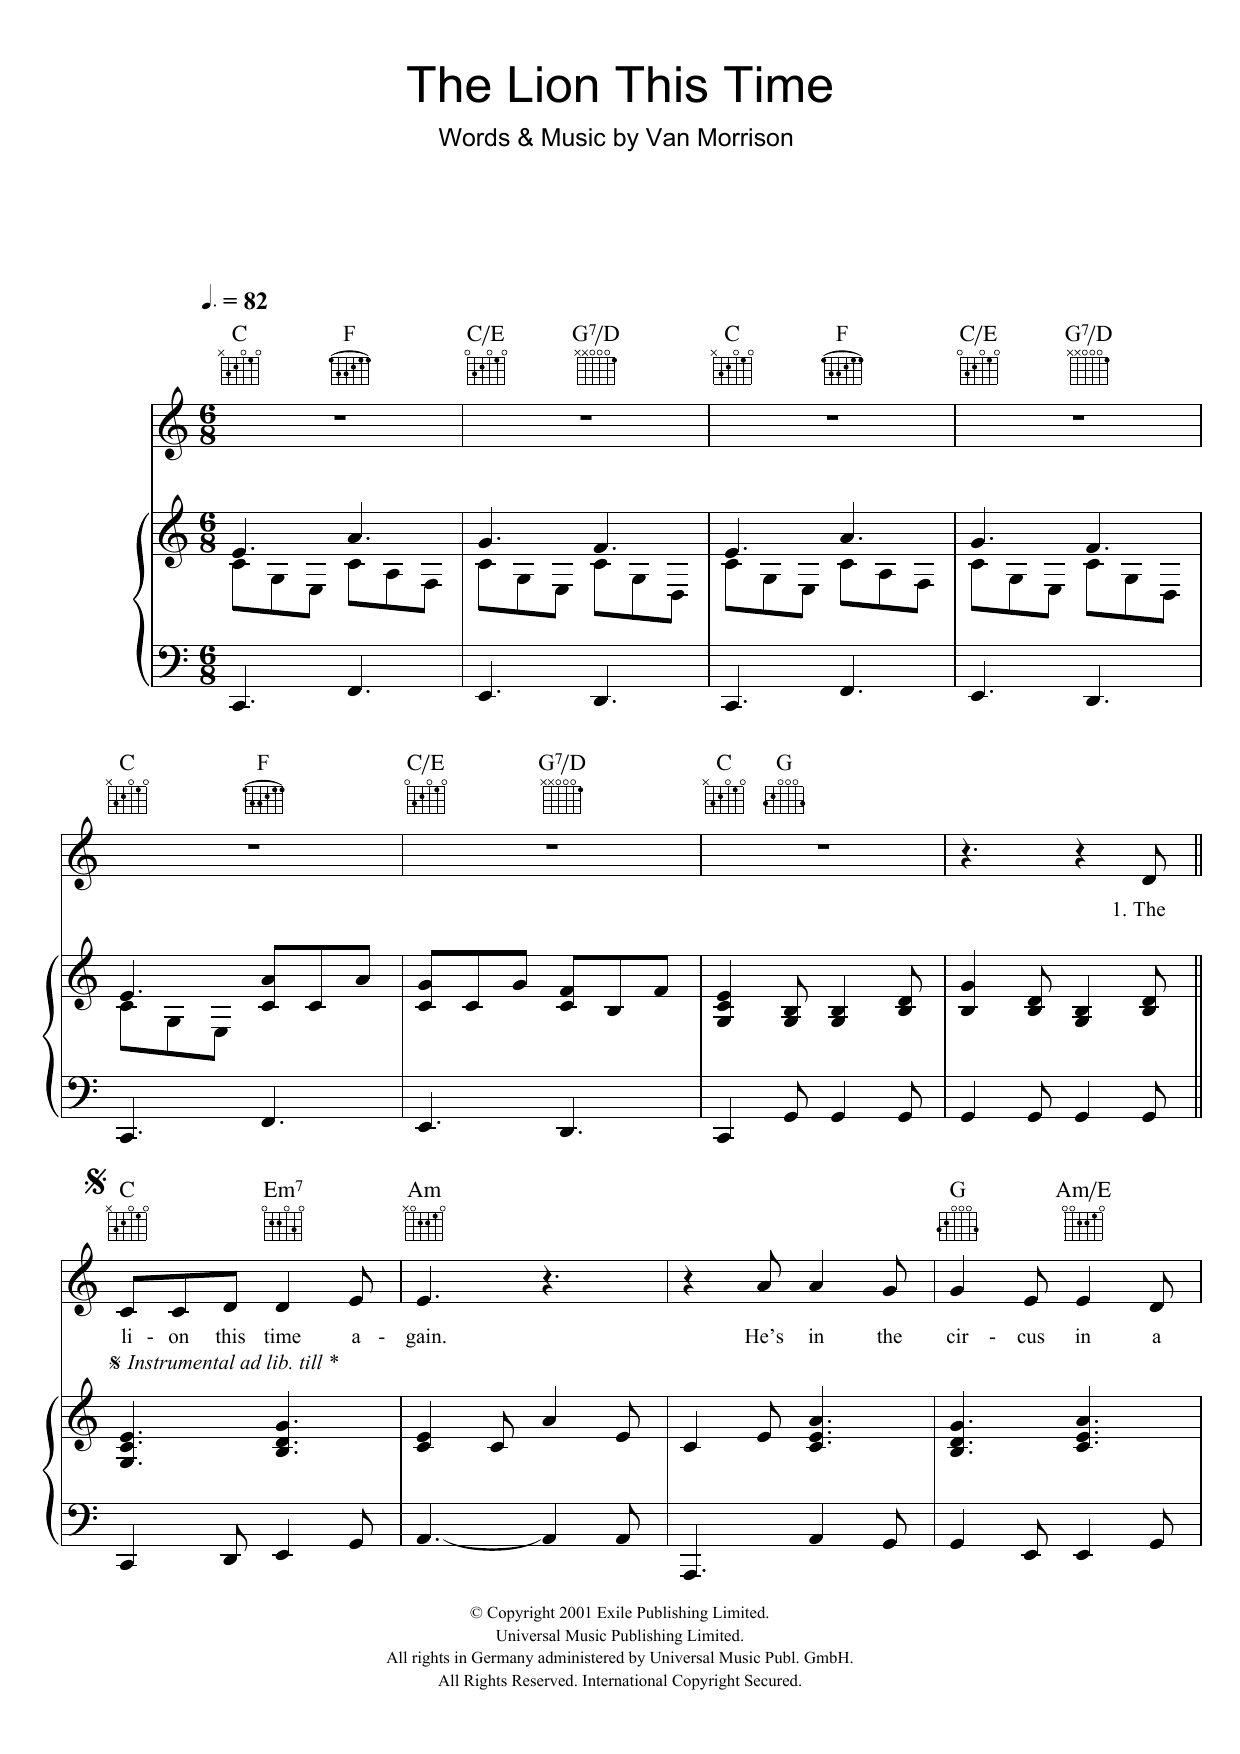 Download Van Morrison The Lion This Time Sheet Music